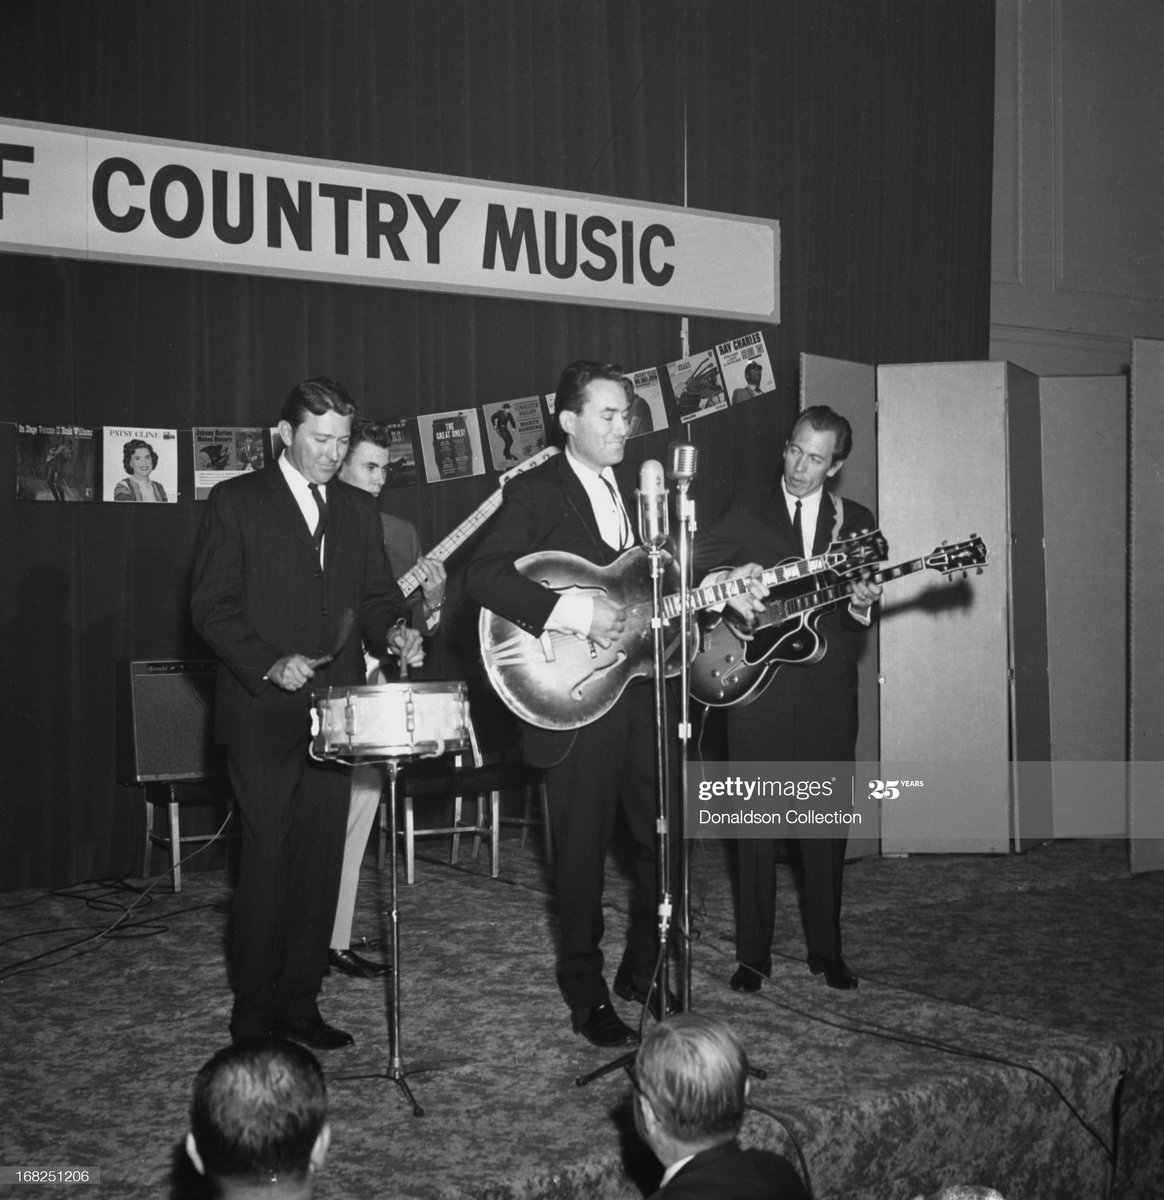 But the industry did not ignore the albums. Instead, in demonstrations to advertisers it heralded them as evidence of country music's modernity & hipness to the times, as seen here in 1963. One of the albums is shown hanging behind Don Gibson, who wrote "I Can't Stop Loving You."